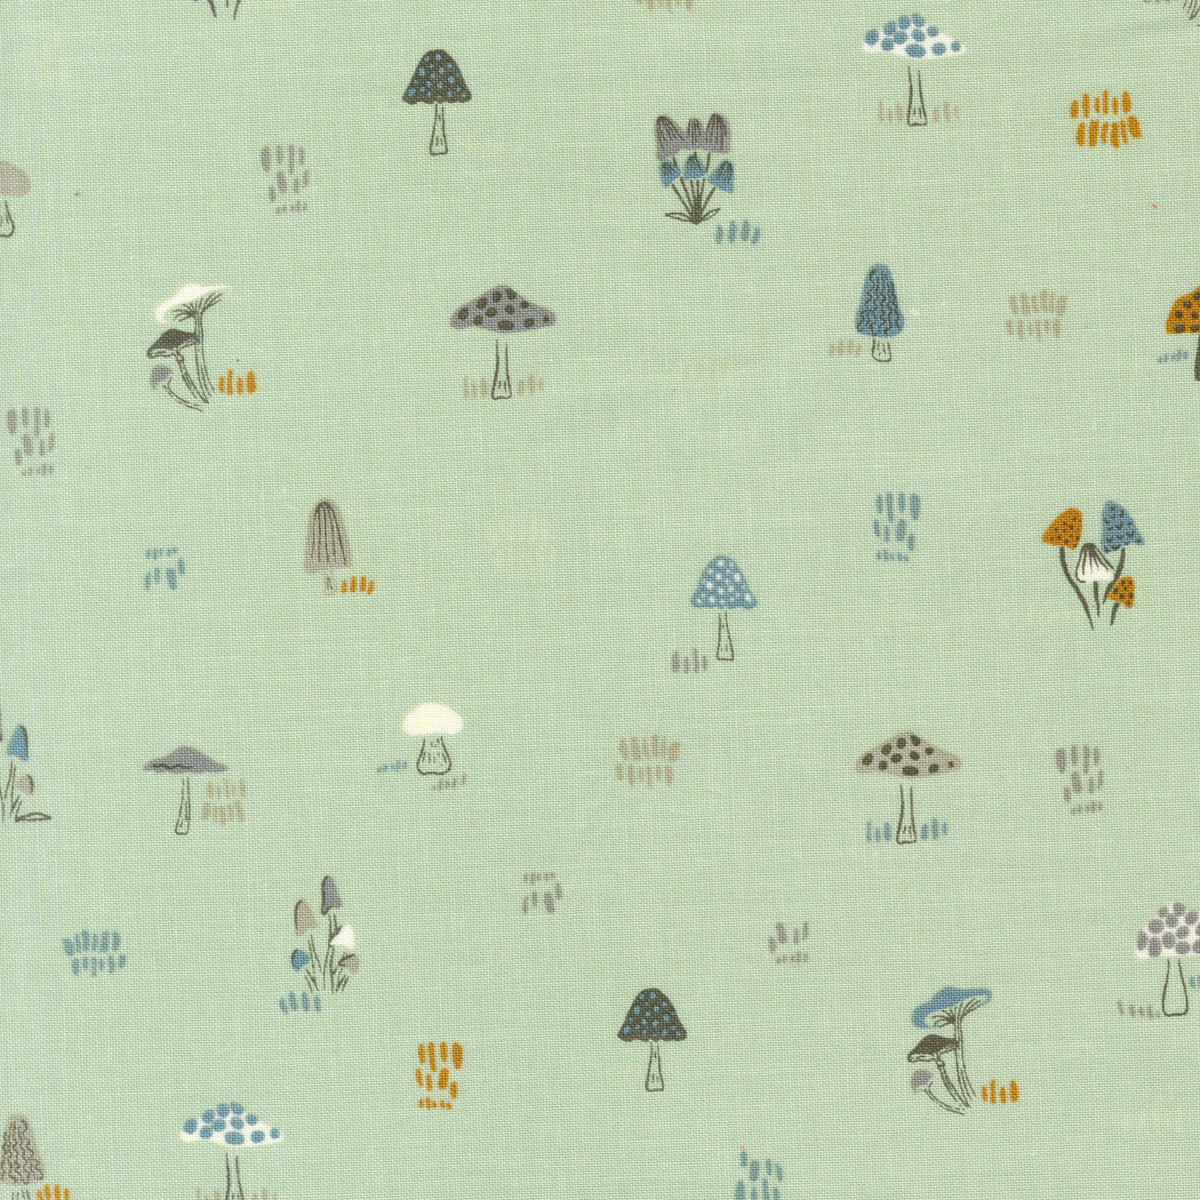 Woodland and Wildflowers Quilt Fabric - Micro Mushrooms in Pale Mint Green - 45585 20